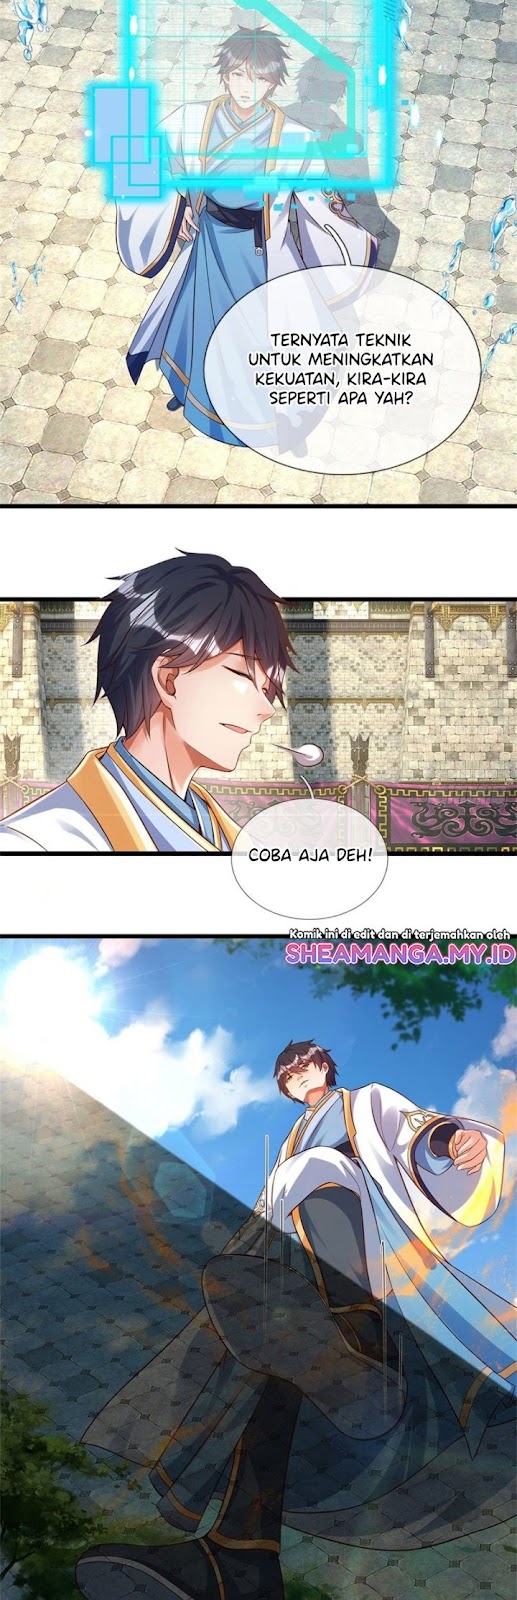 Star Sign In To Supreme Dantian Chapter 48